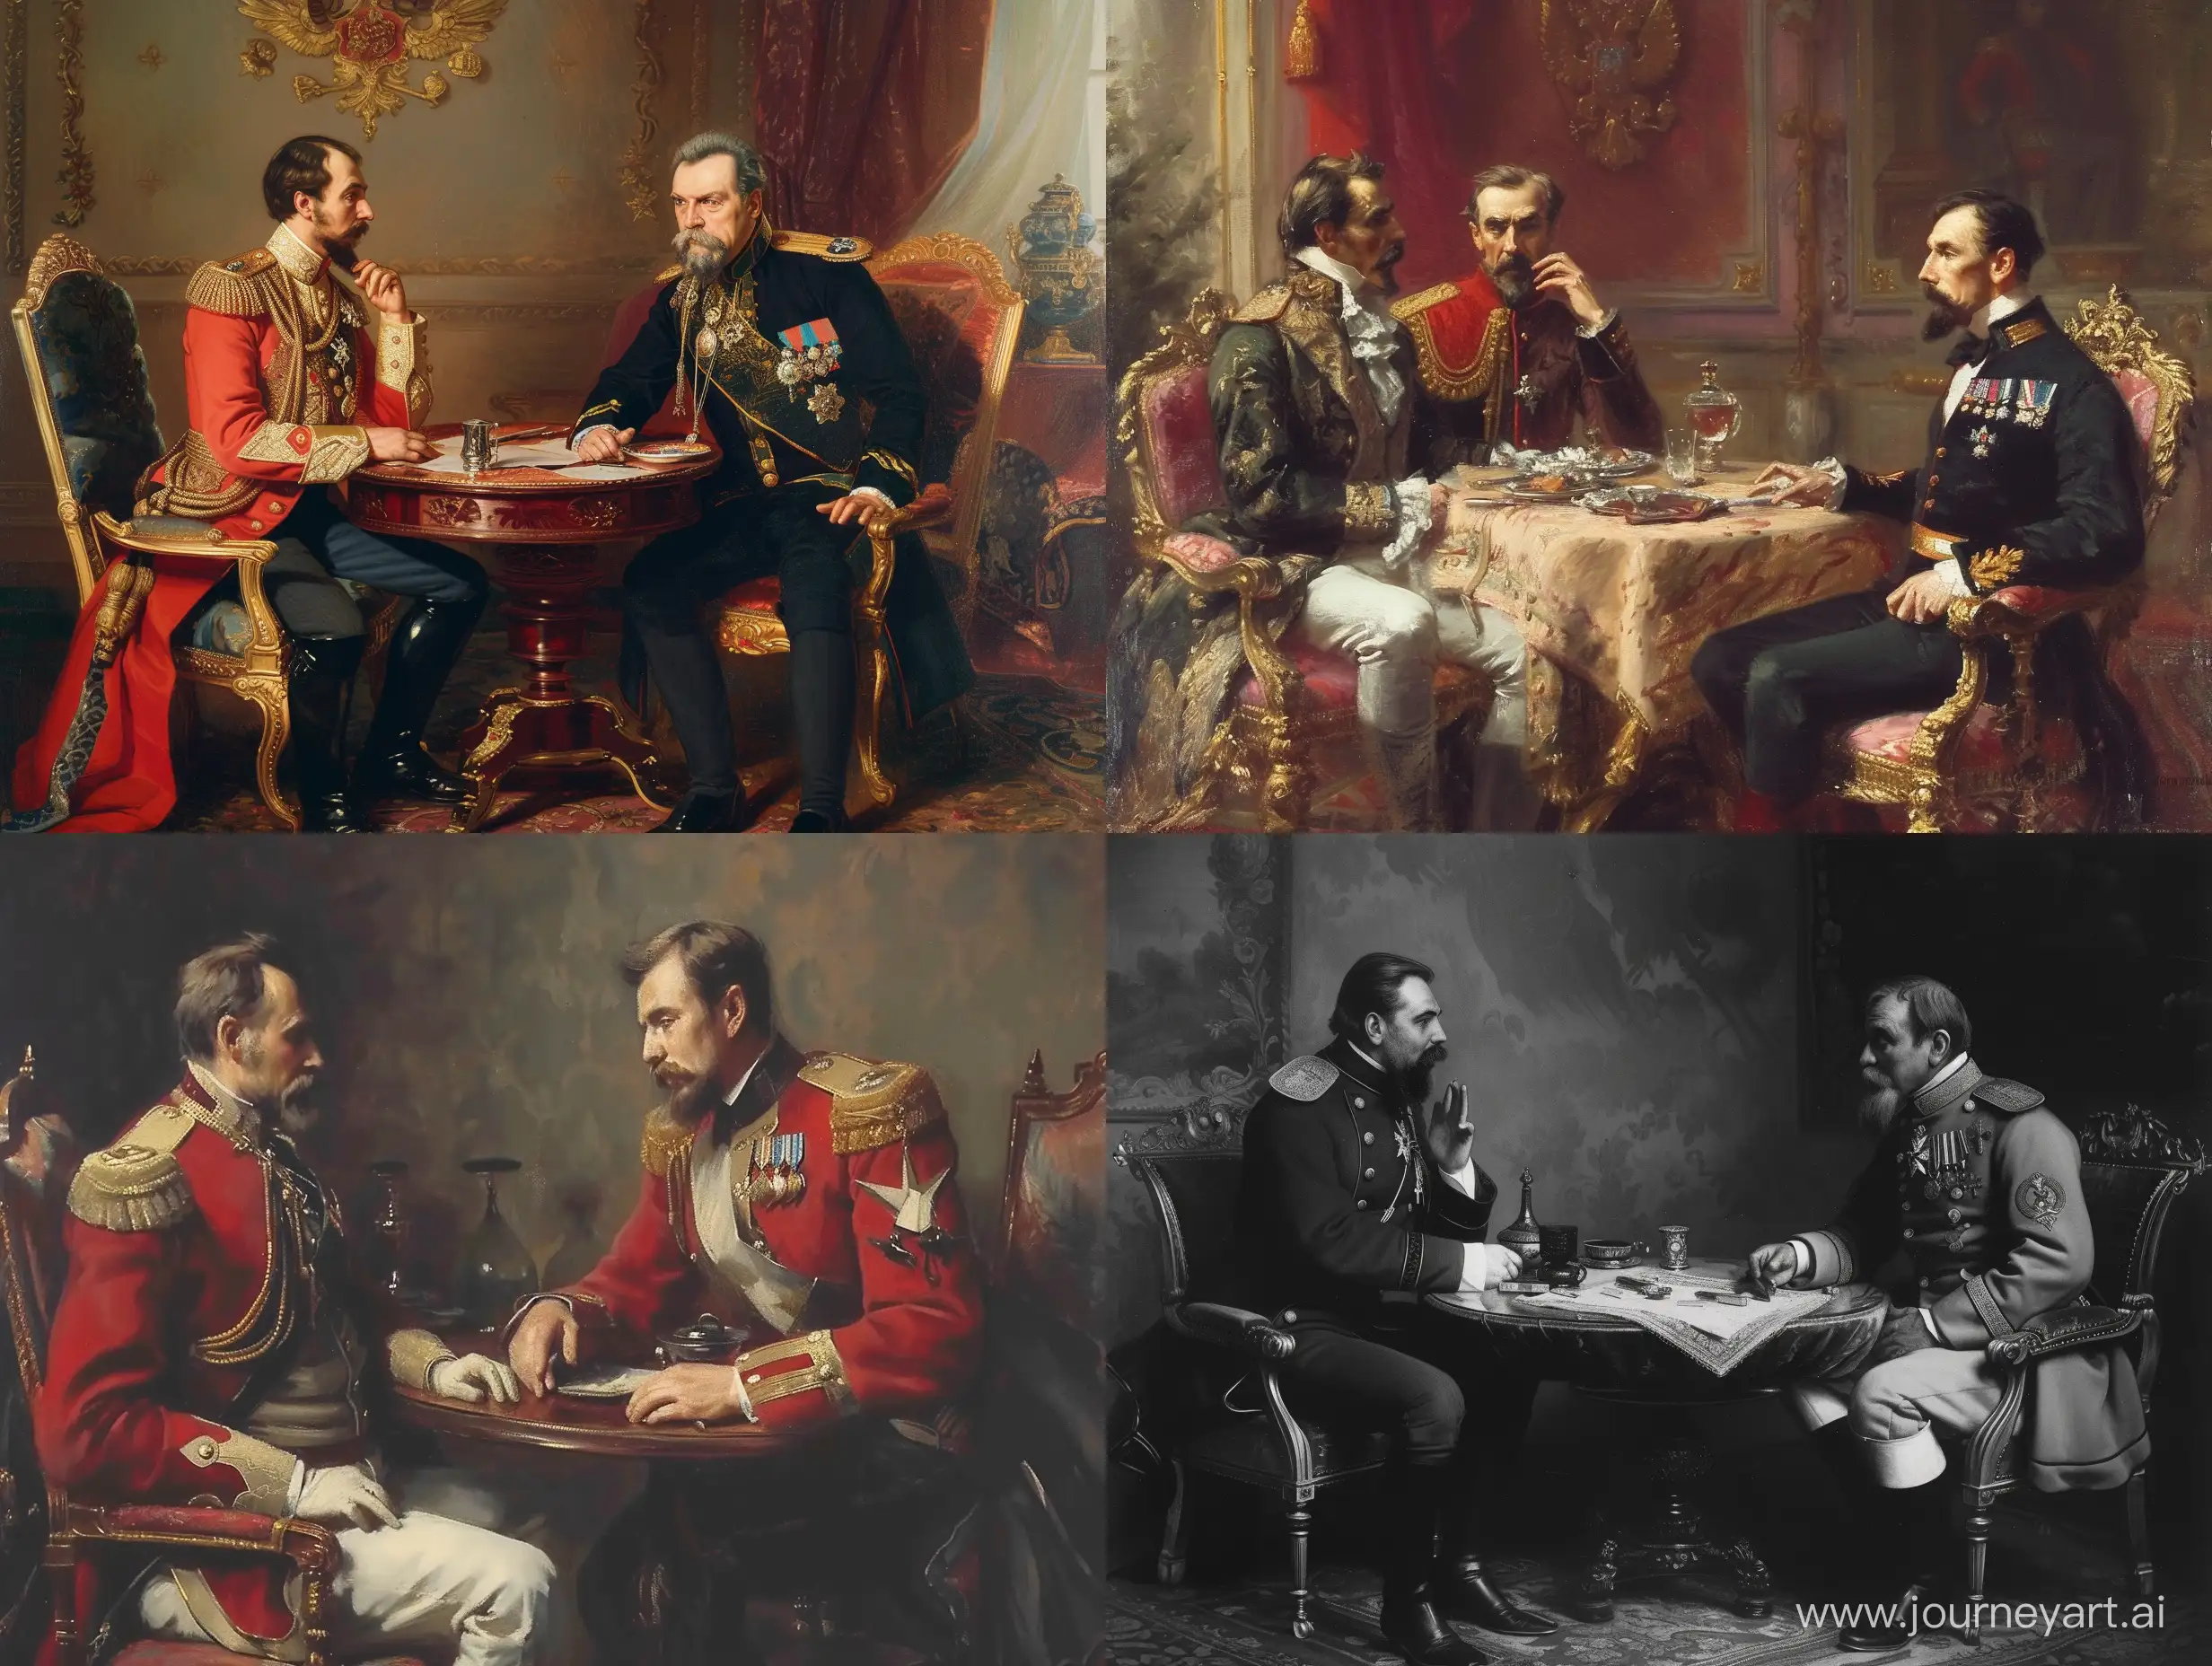 Alexander I and Count Stroganov are sitting at a table and talking amicably